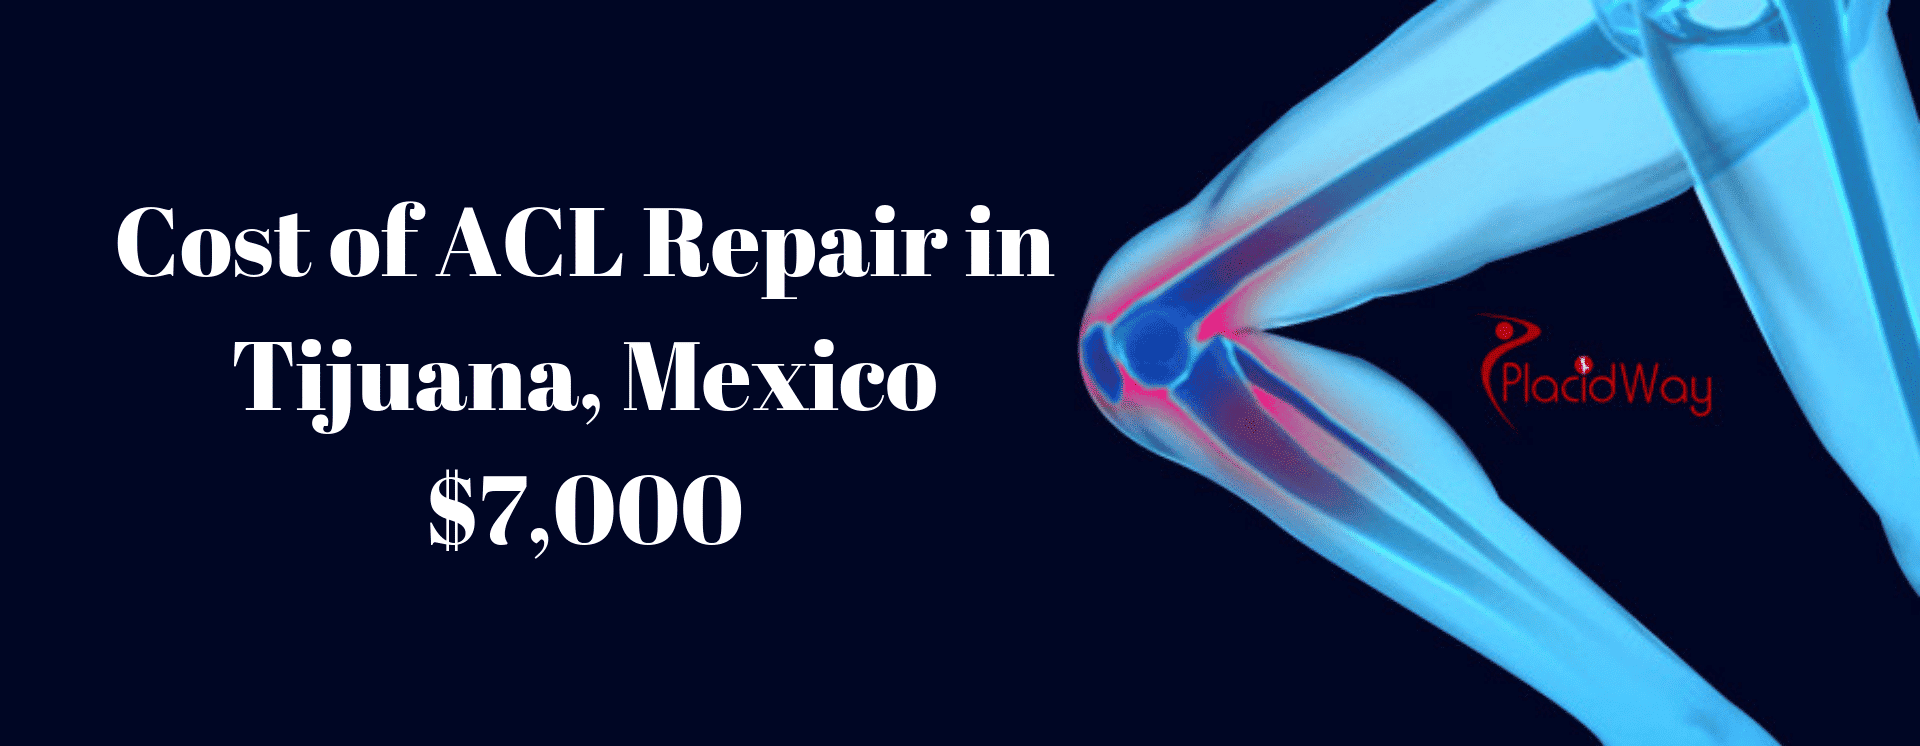 Cost of ACL Repair  in Tijuana, Mexico 